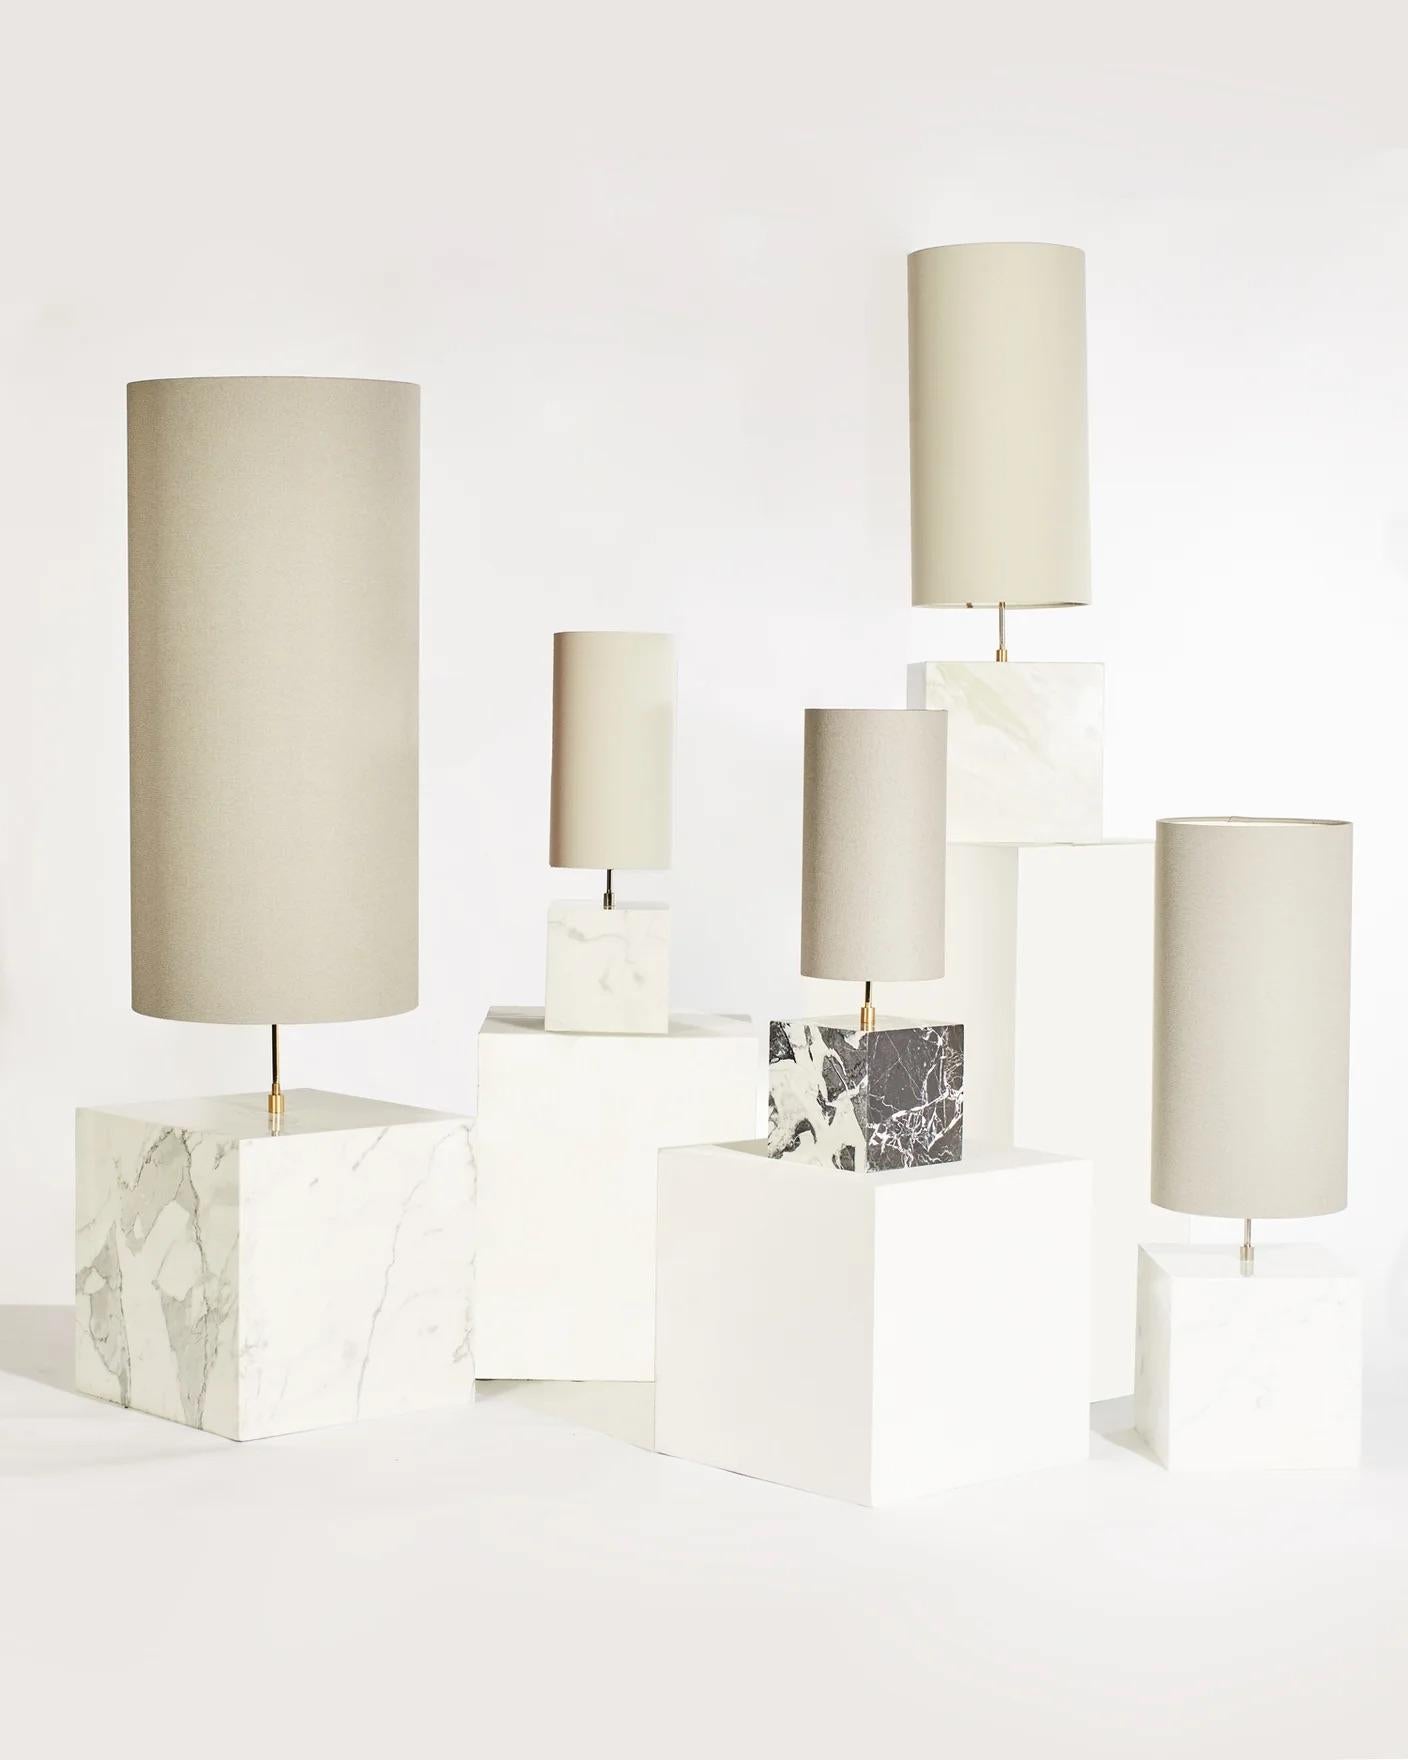 Cielo Marble & Brass Coexist Table Lamp 'Large' by Slash Objects - Floor Sample In Good Condition For Sale In Brooklyn, NY